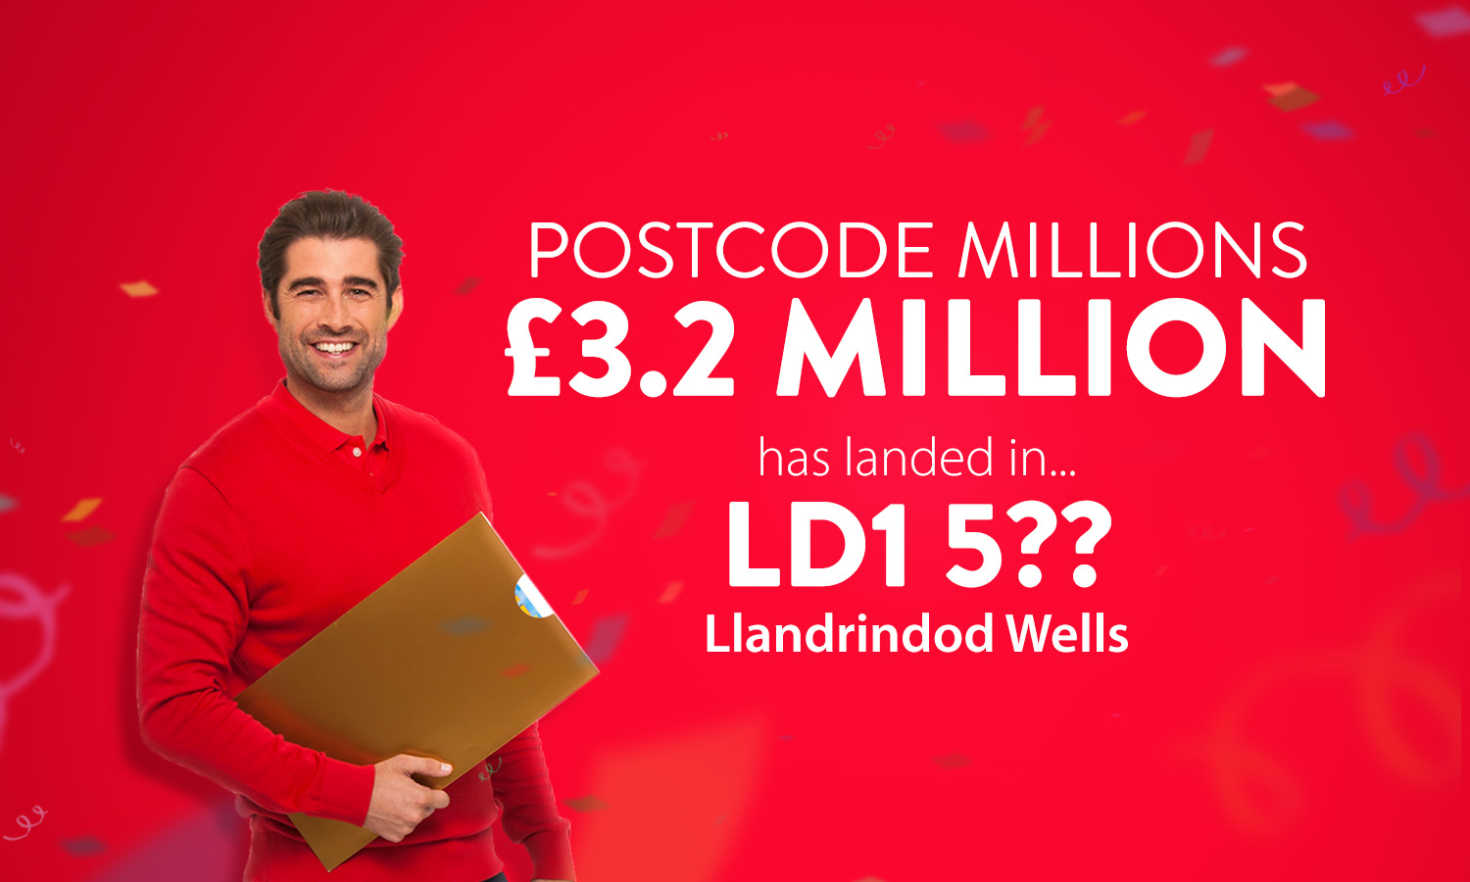 Our latest Postcode Millions has landed in Llandrindod Wells, and players will share a thrilling £3.2 Million